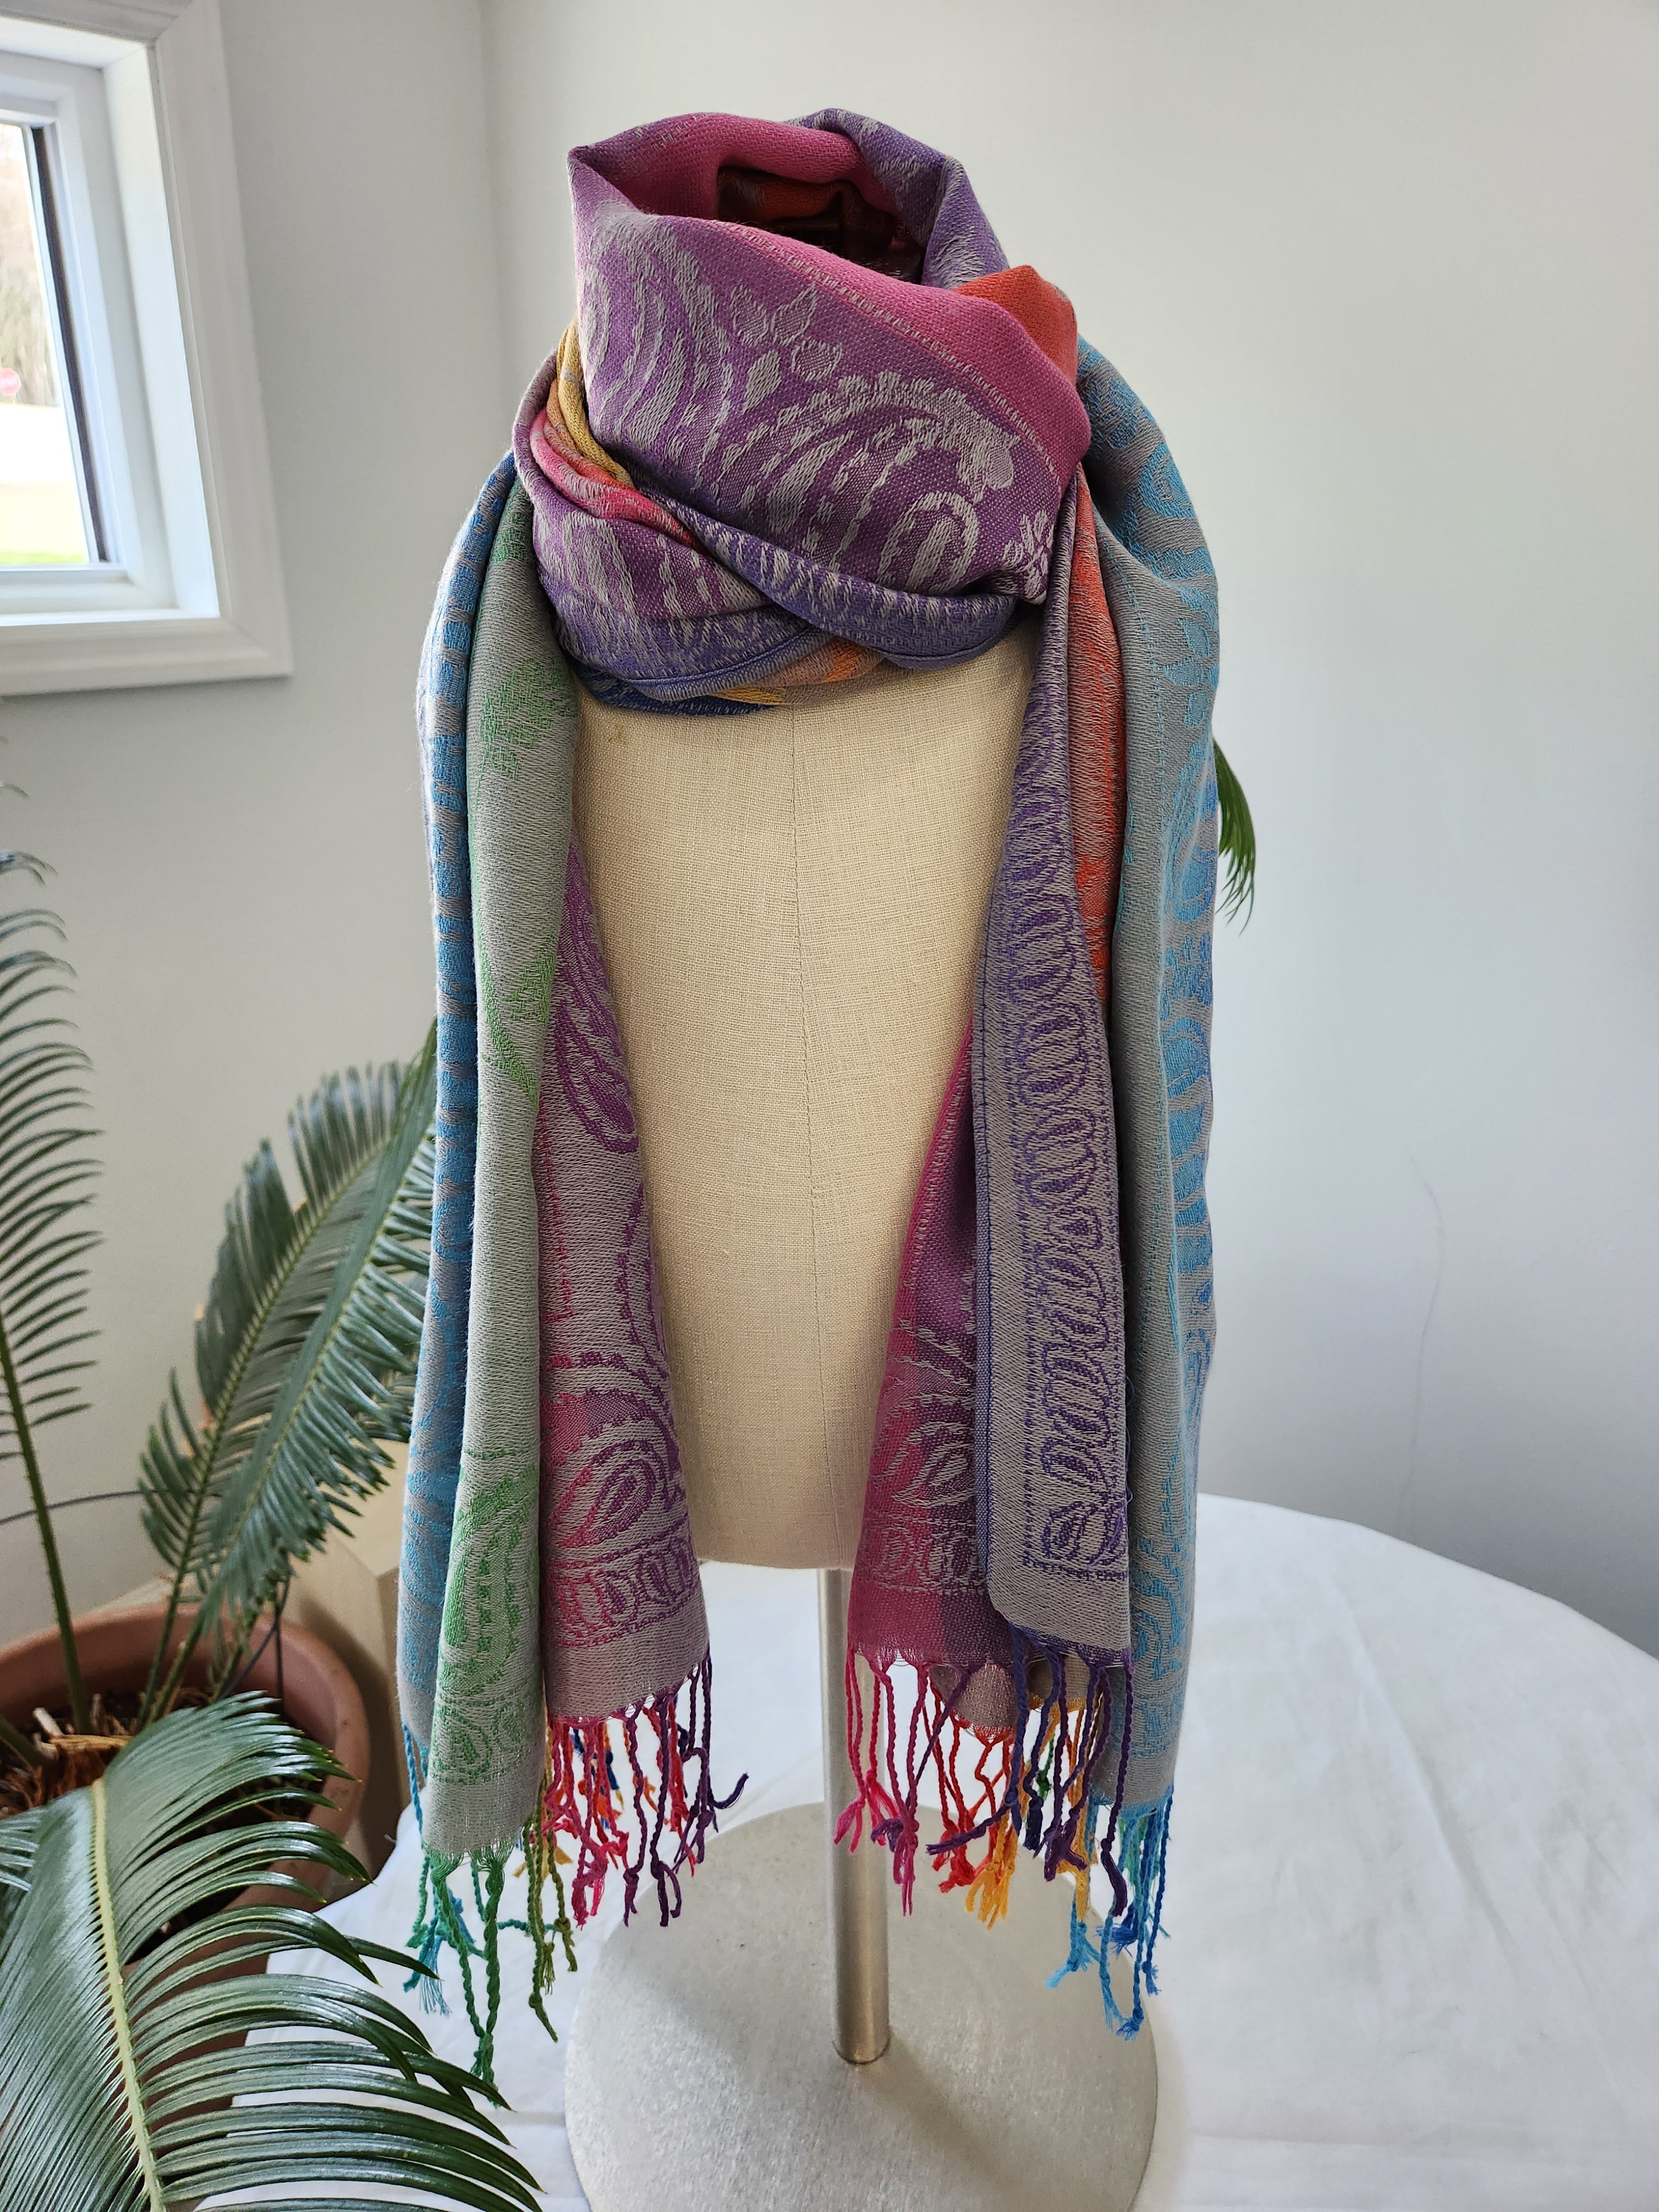 Buy gray Women&#39;s Elegant Scarf or Wrap, Colorful Jewel-Tones, Great Gift for Holidays